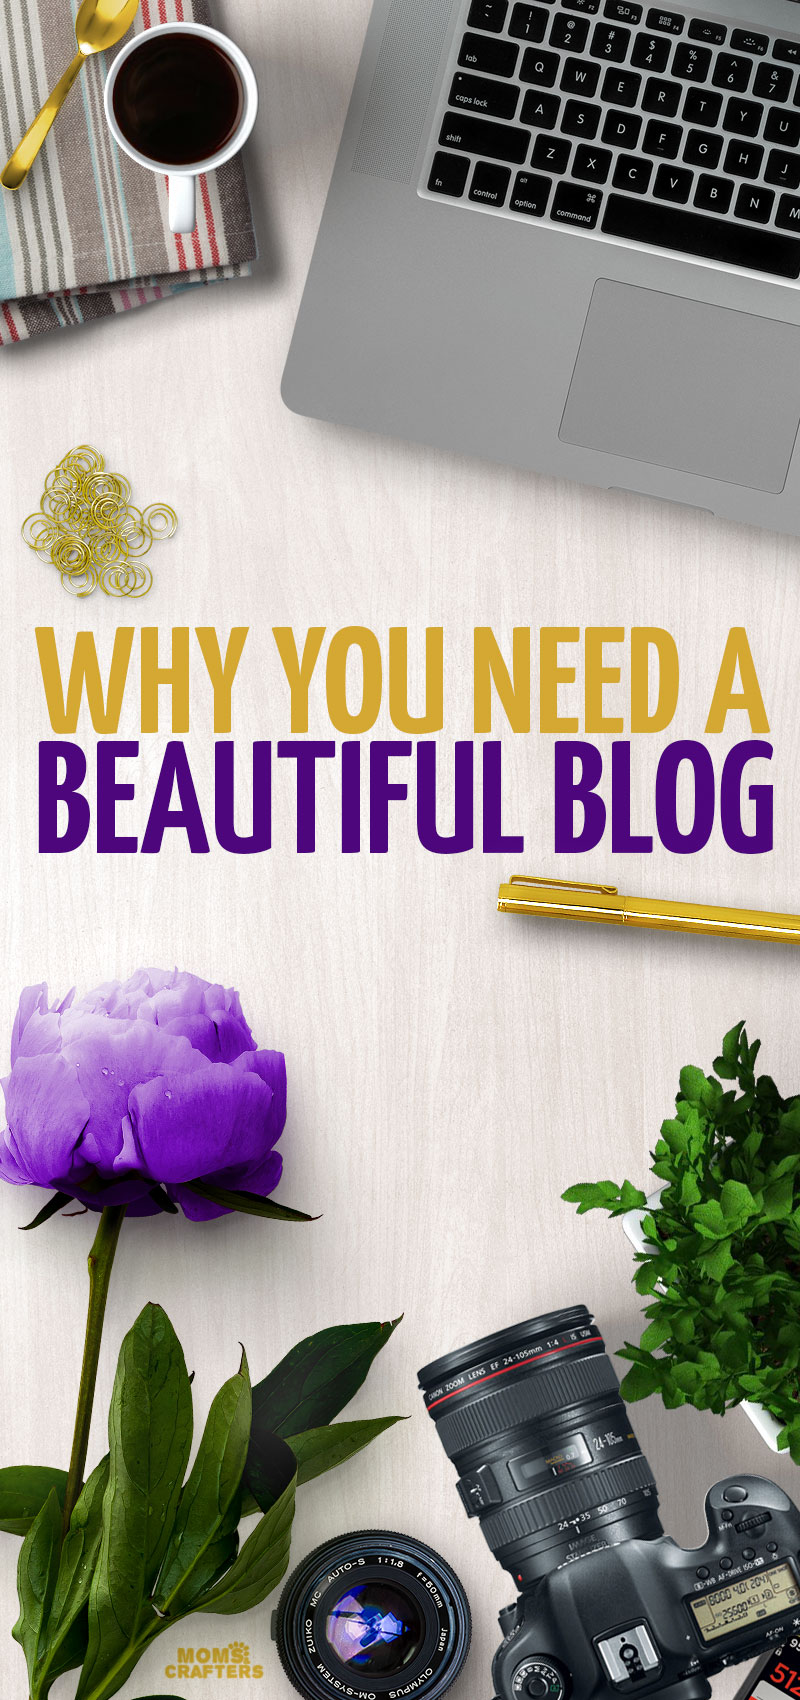 How important is it that you have a beautiful blog? These blogging tips share the benefits of a well-designed blog, along with some advice to get you started with graphic design for bloggers.